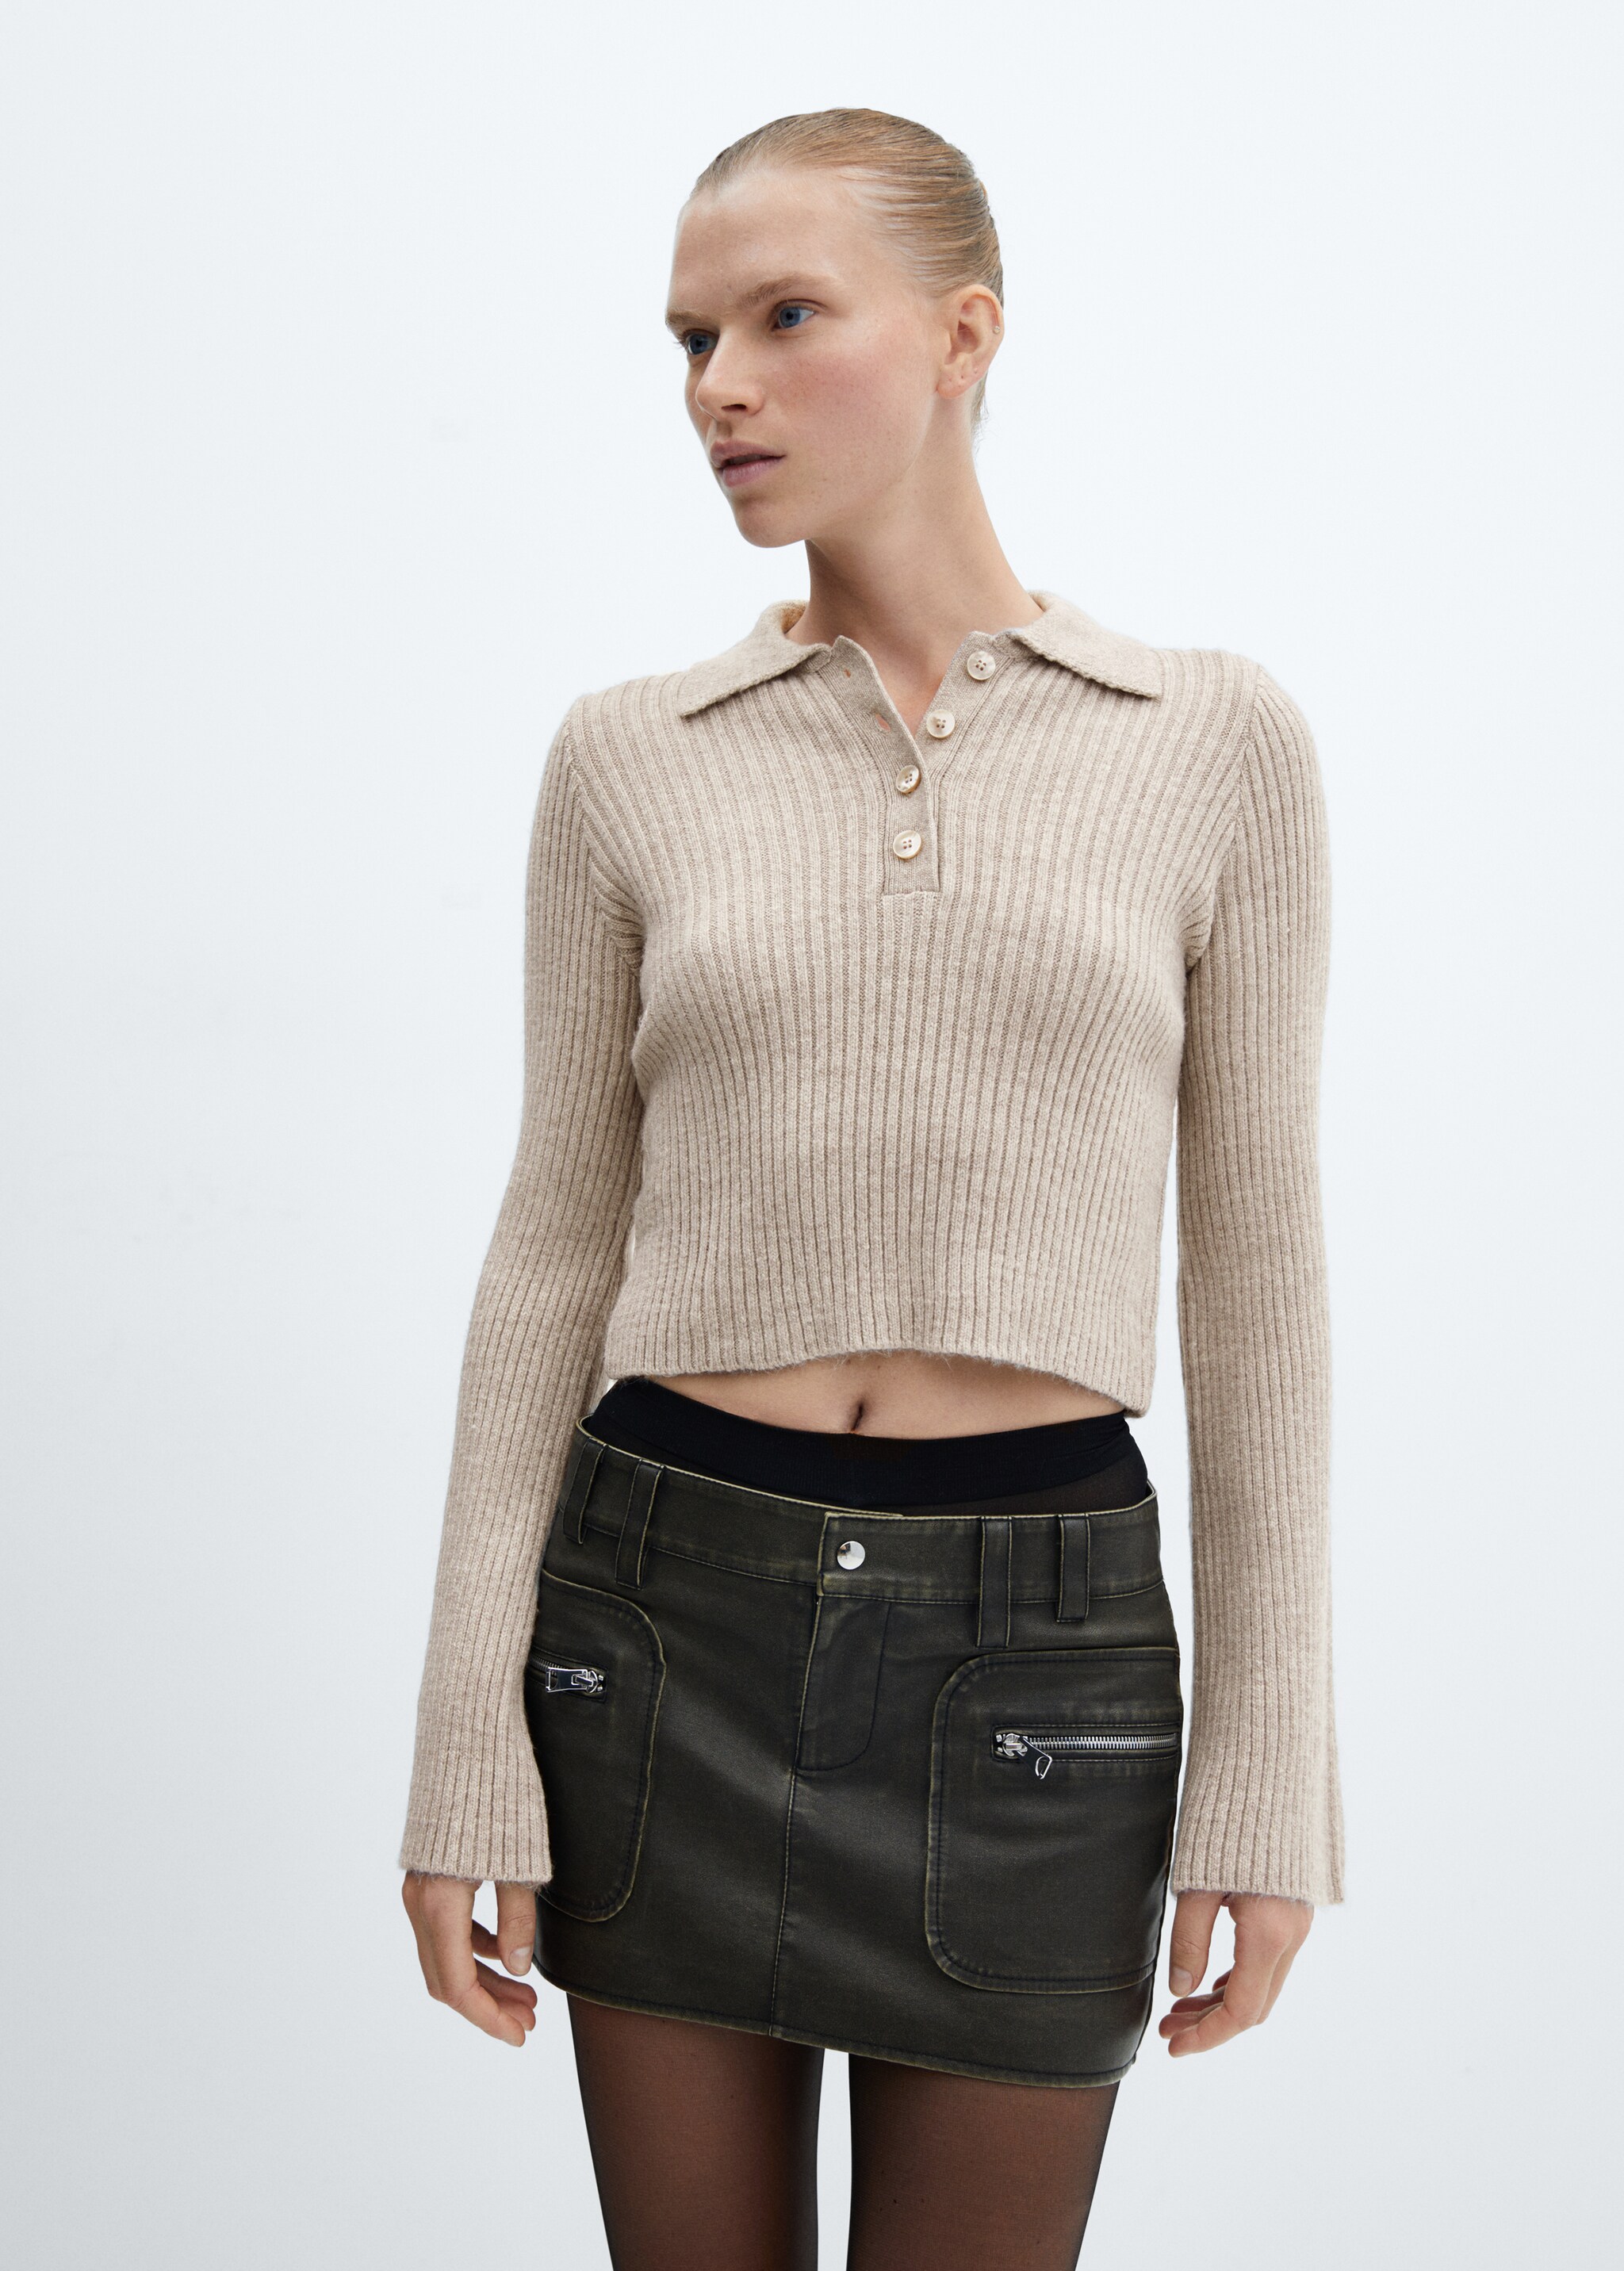 Polo-neck sweater with flared sleeves  - Medium plane